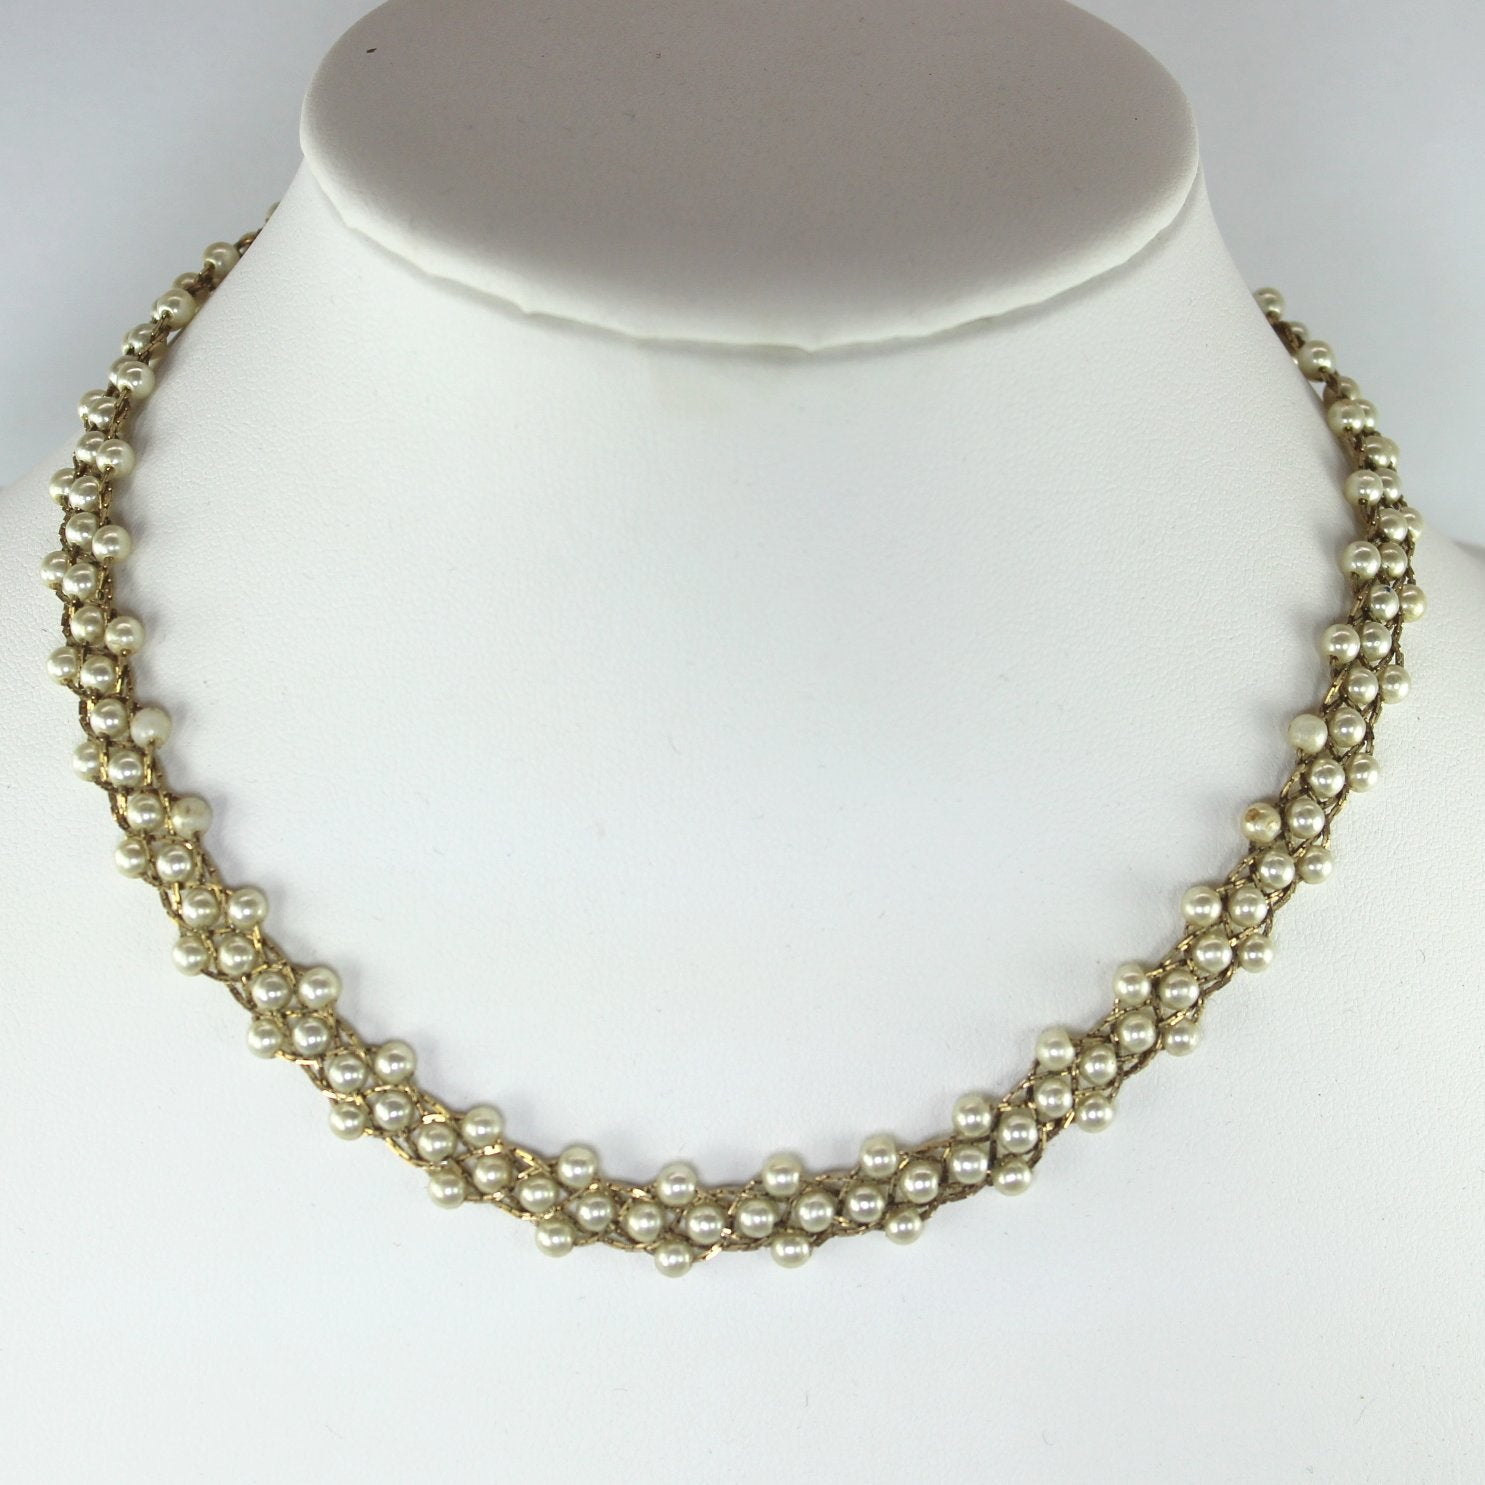 Napier Signed Faux Pearl Necklace - Etsy